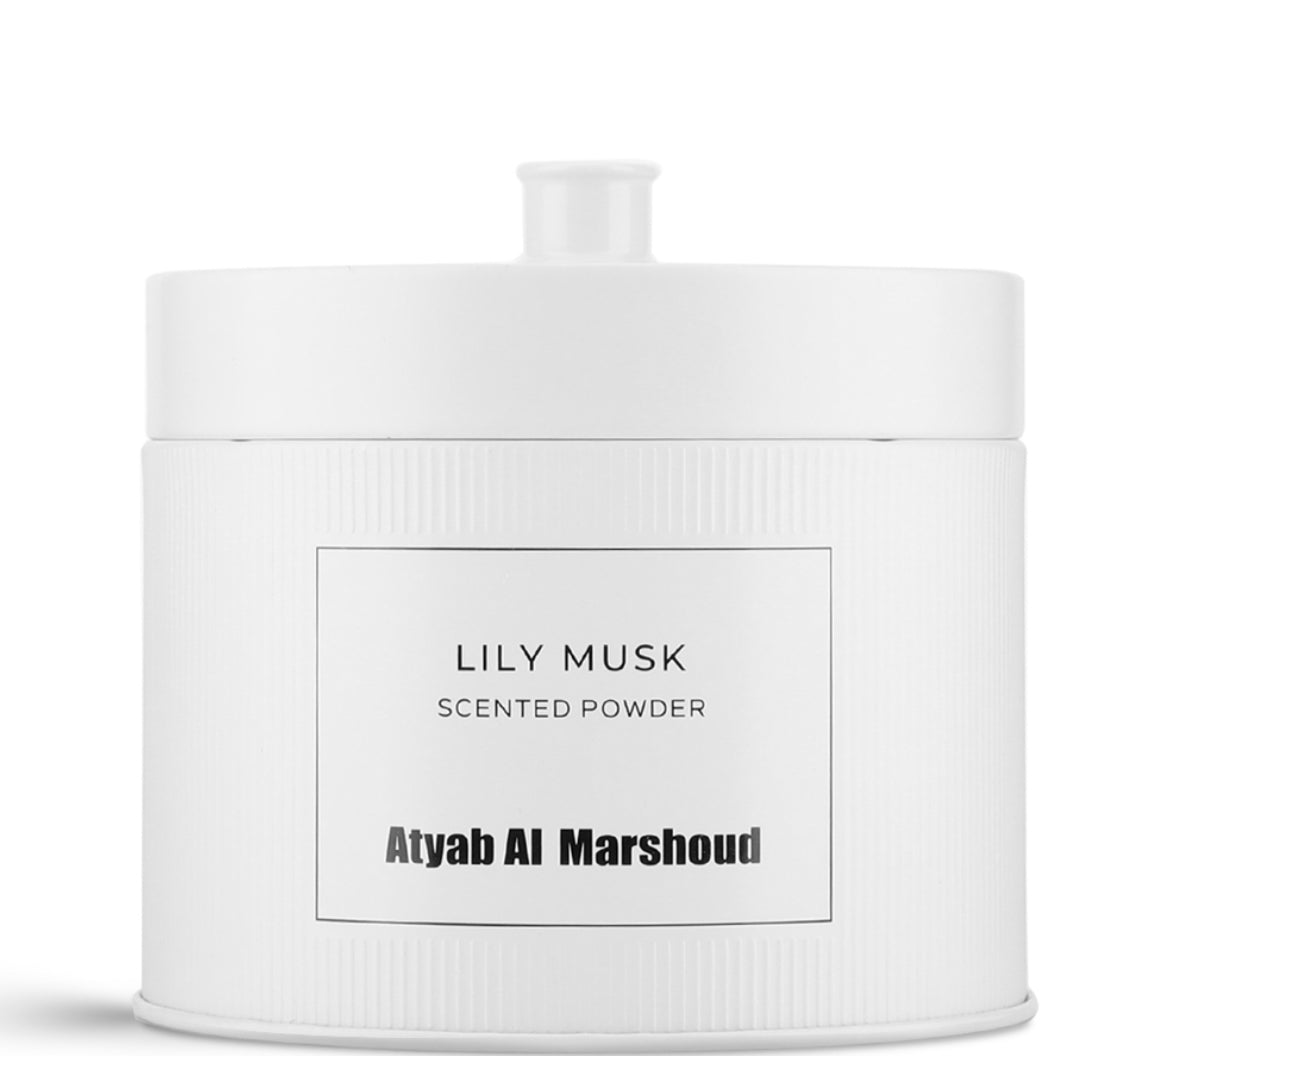 Lily Musk Scented Powder - 170g